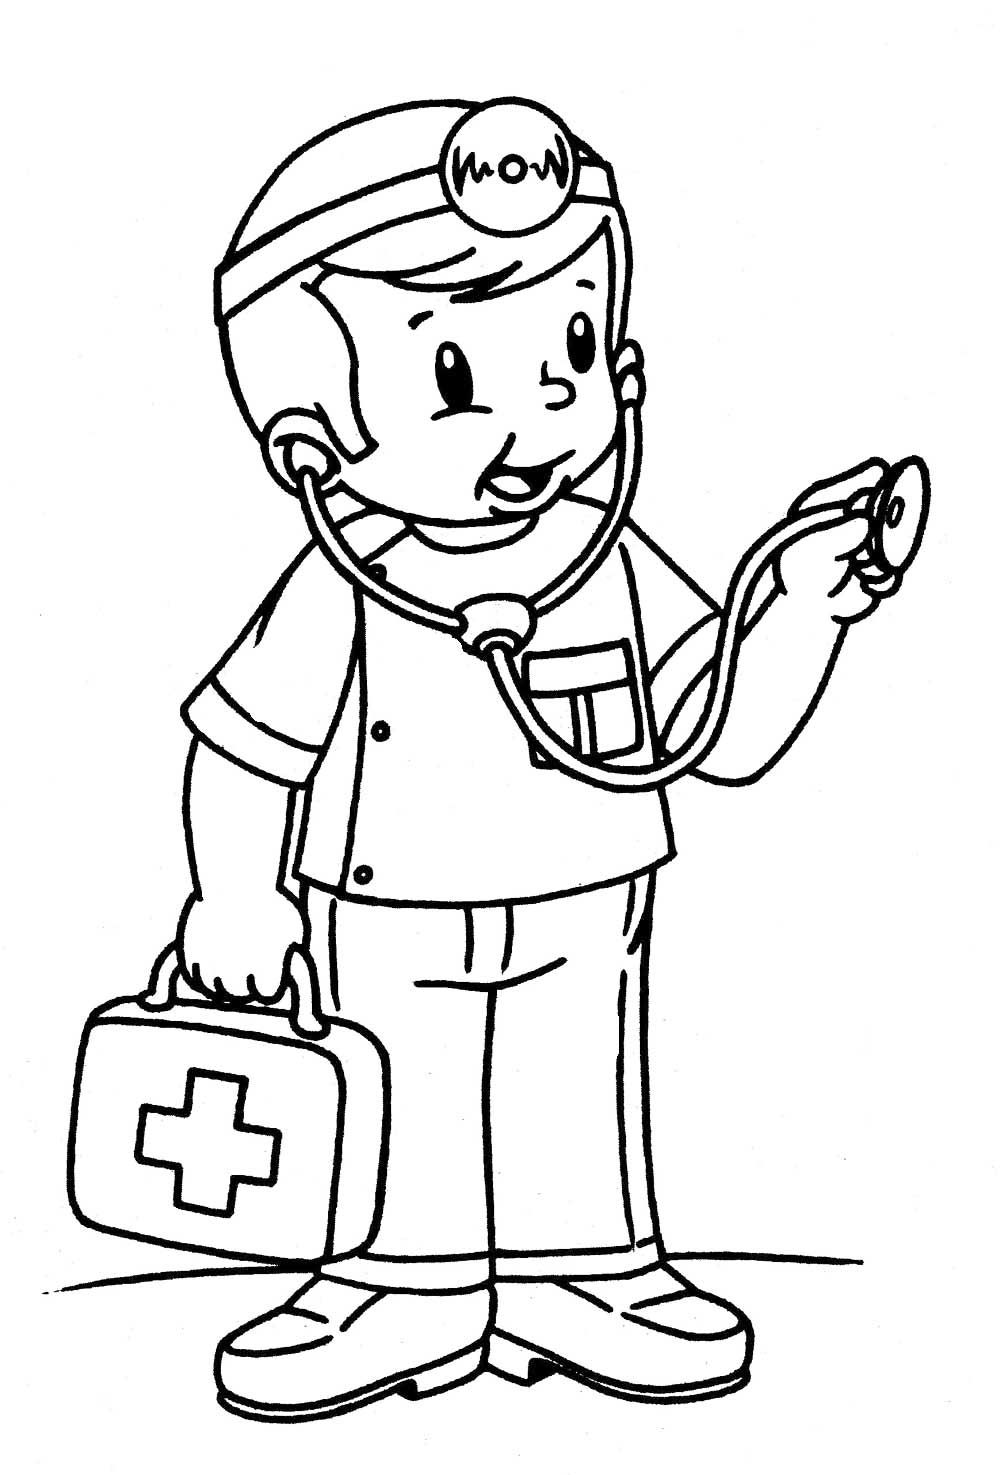 doctor-printable-coloring-pages